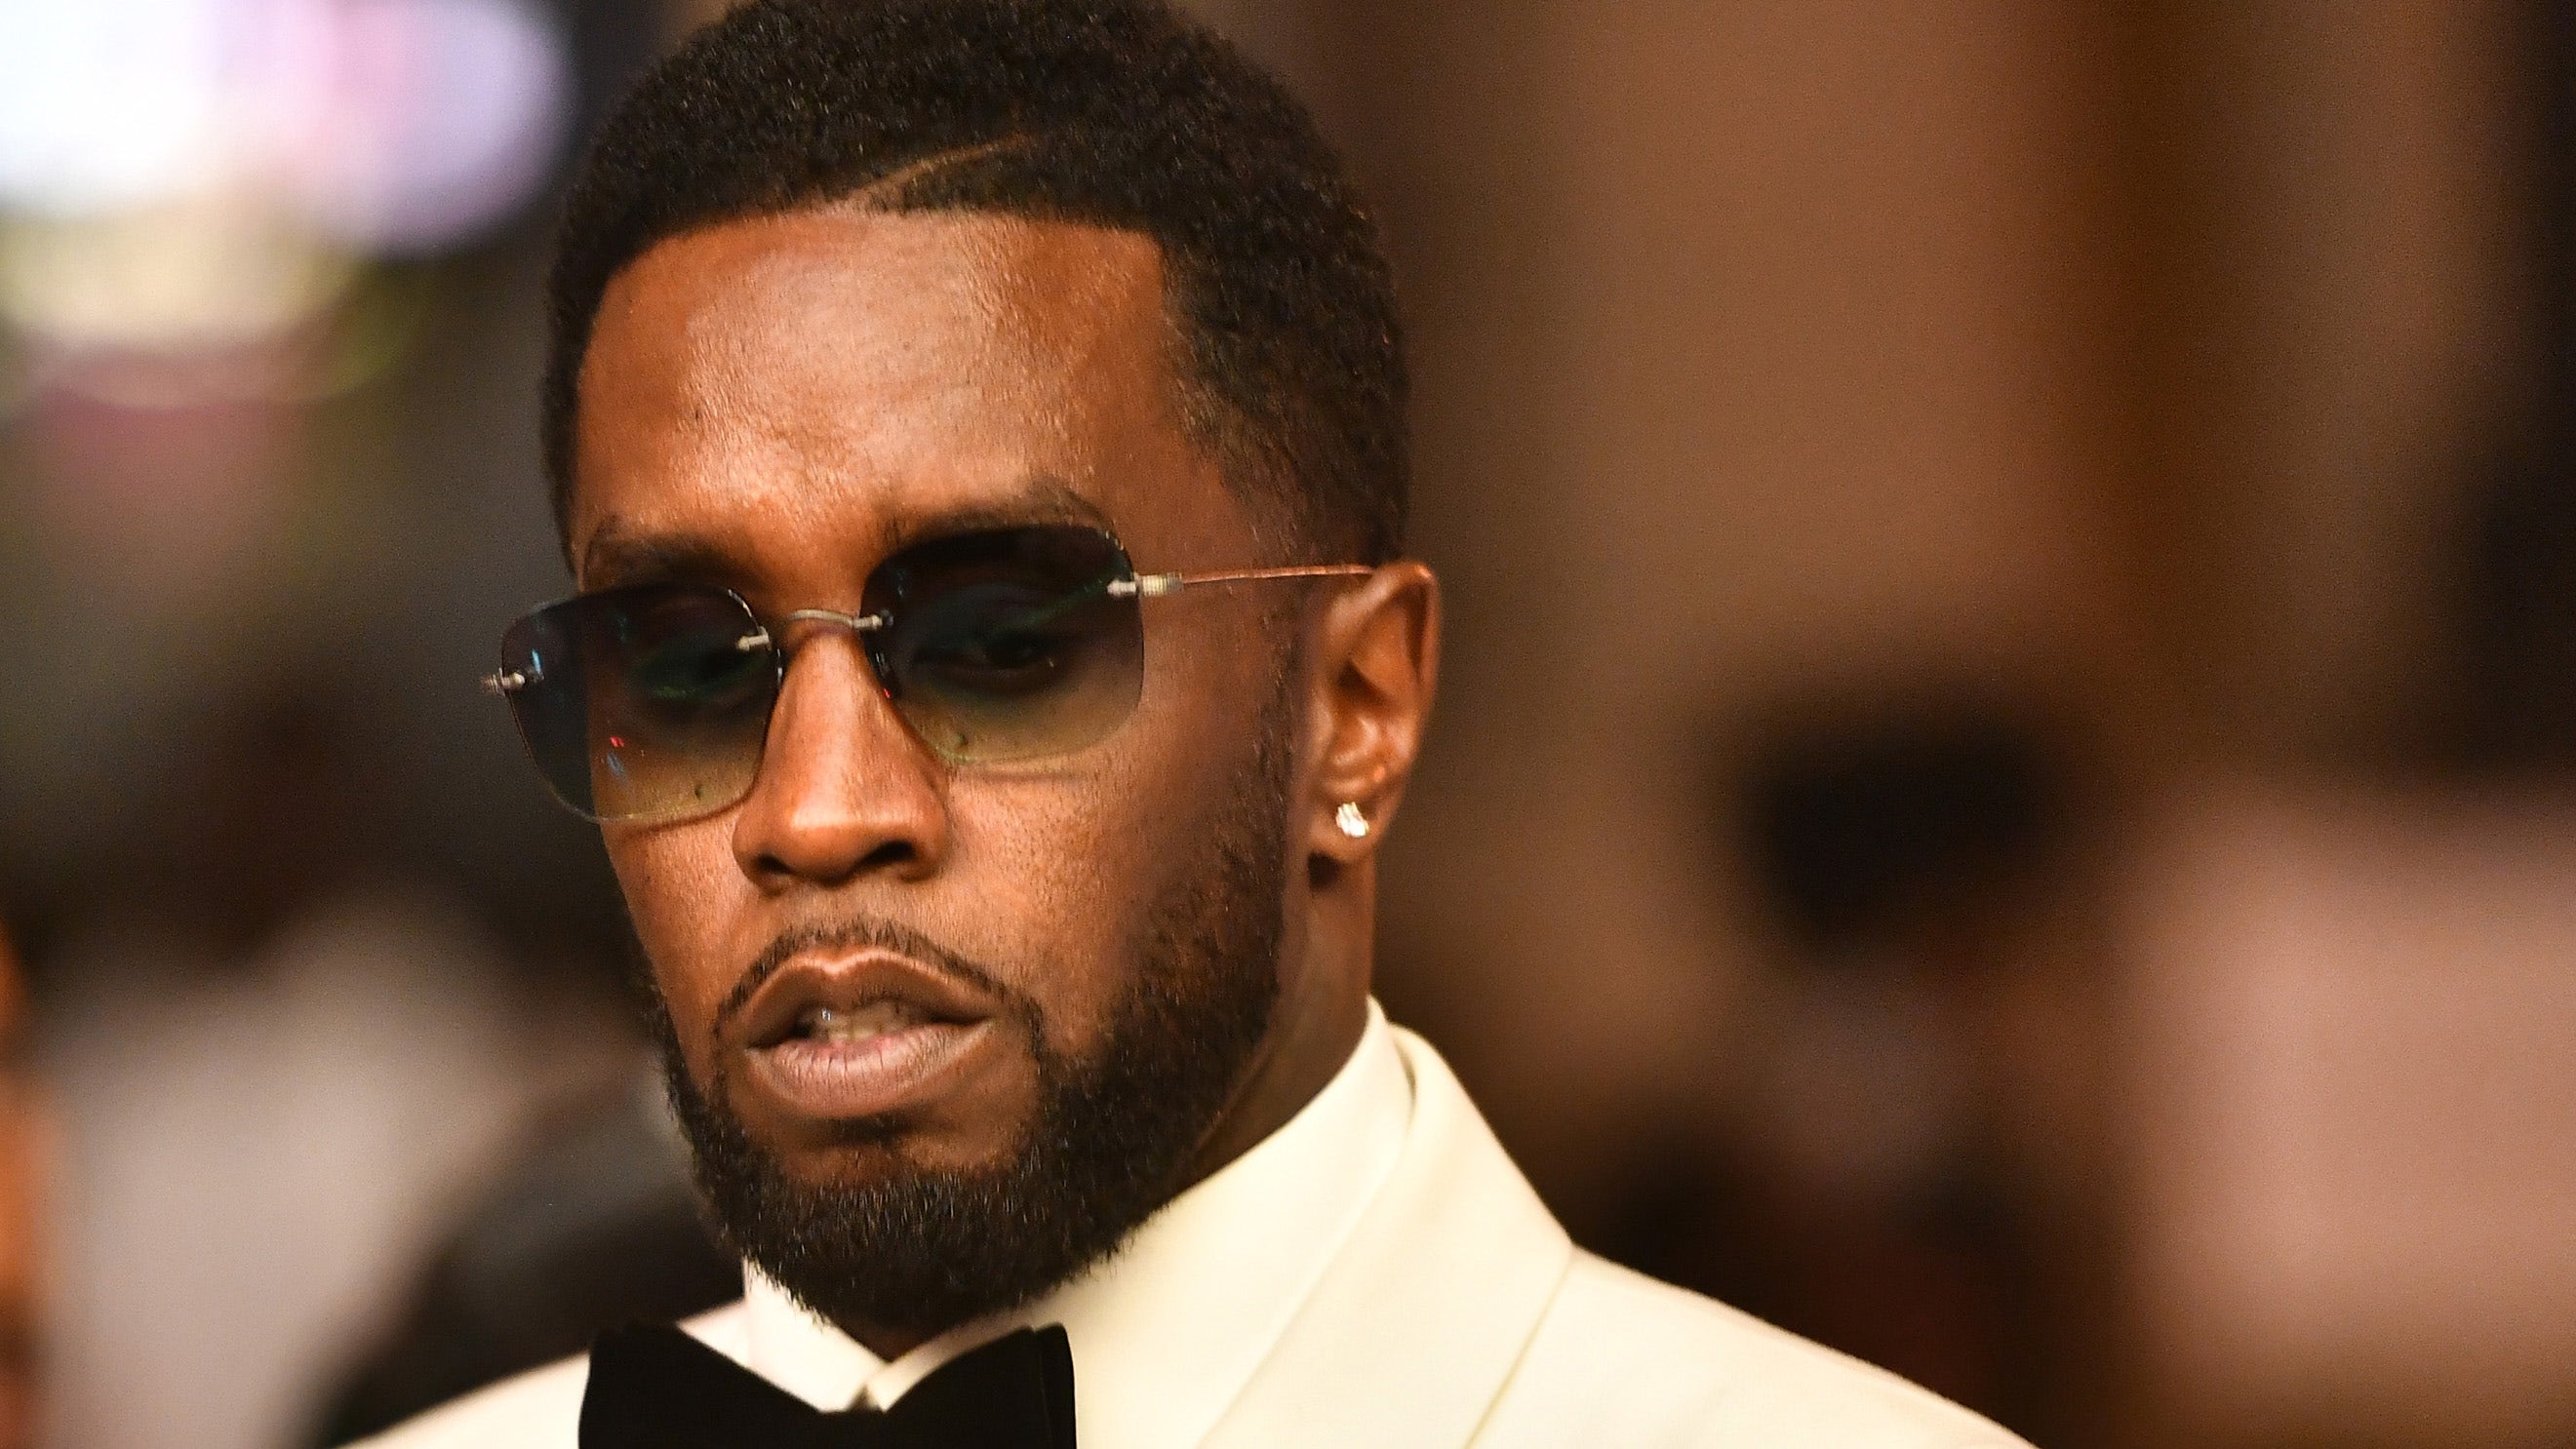 Dancer catches fire at Diddy party in Atlanta: report